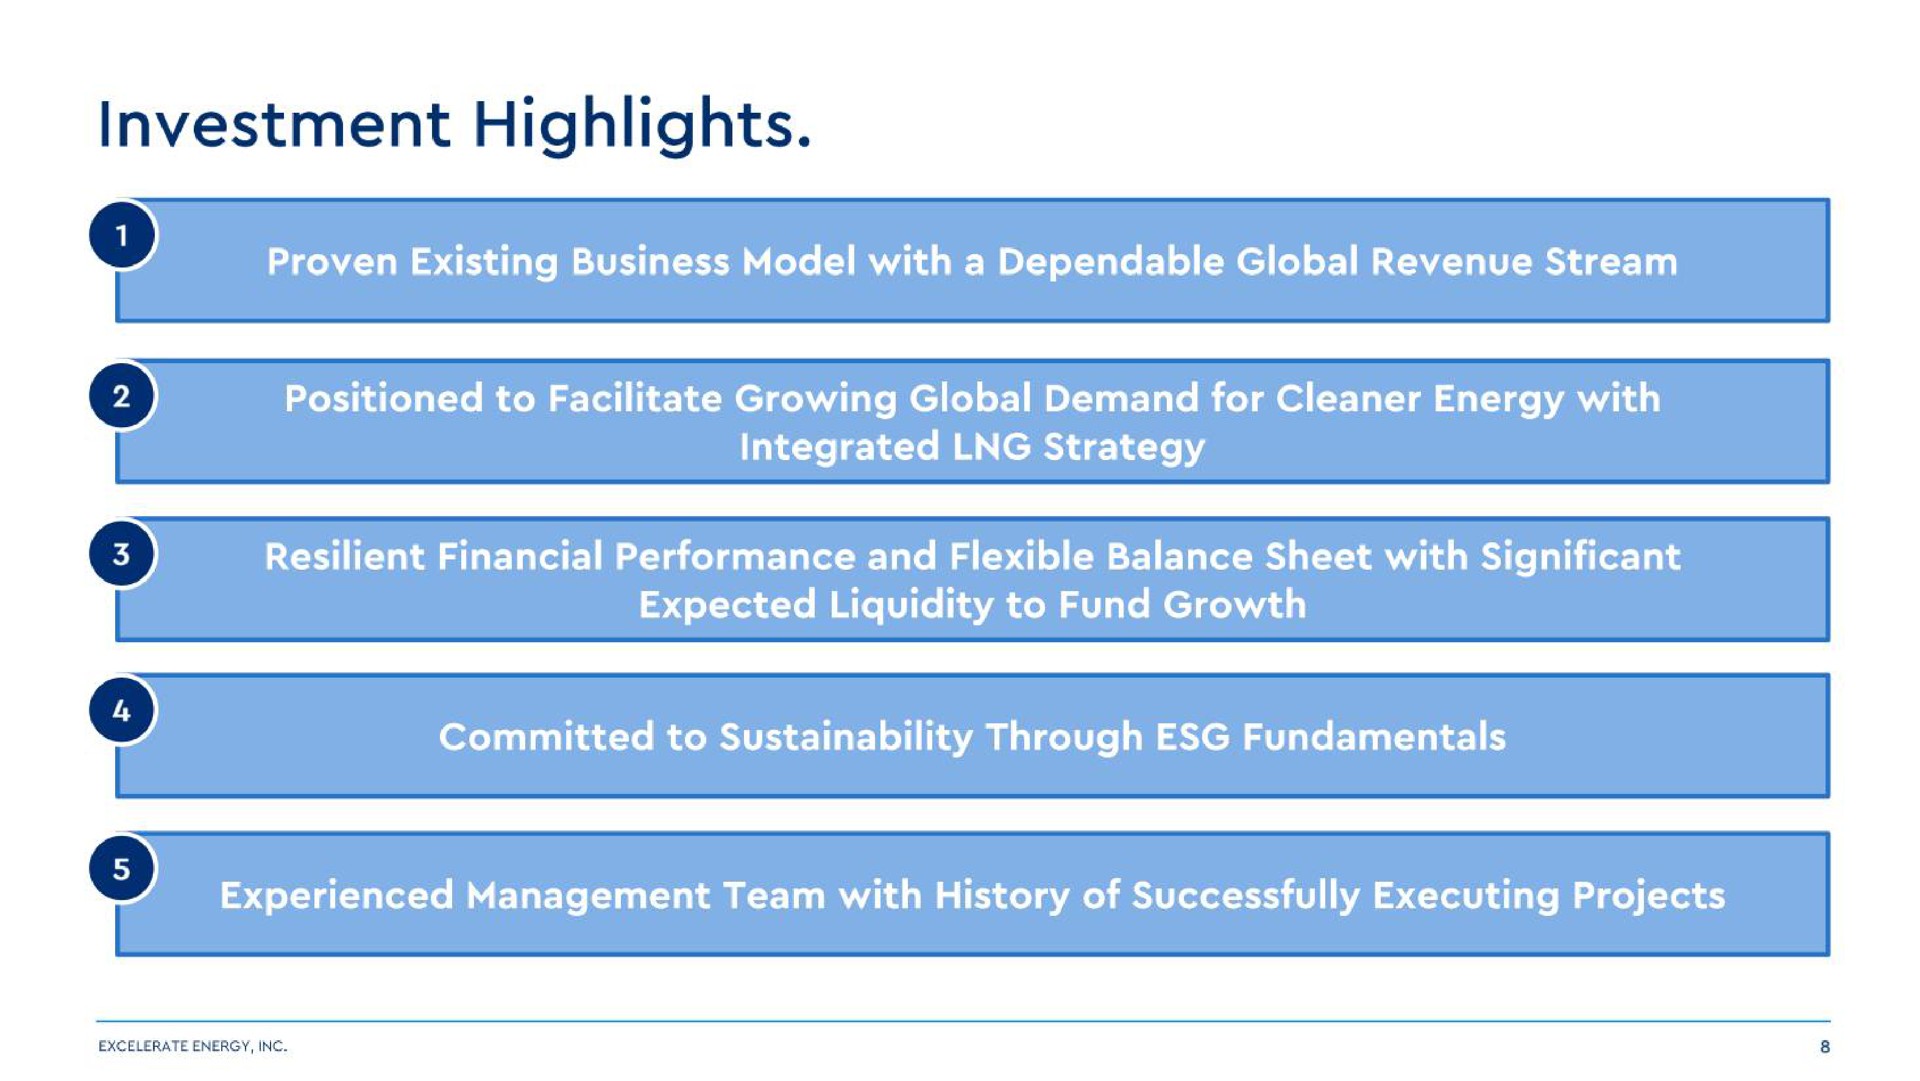 investment highlights | Excelerate Energy